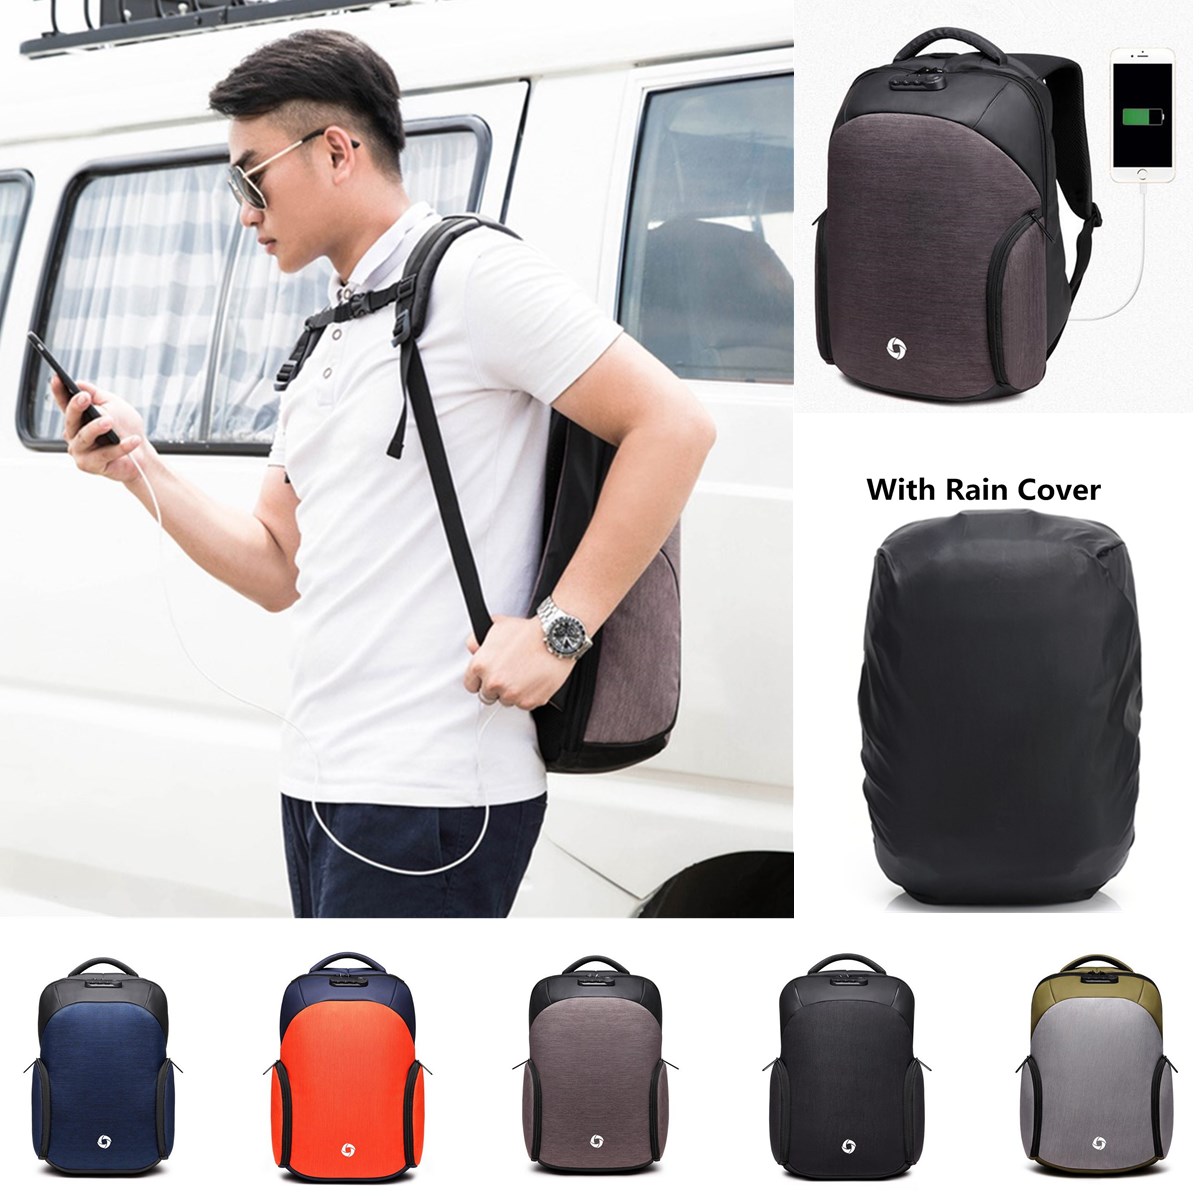 USB-Charge-Anti-theft-Backpack-Laptop-Mens-Backpacks-Outdoor-Travel-Business-Bag-School-Bags-1330618-1